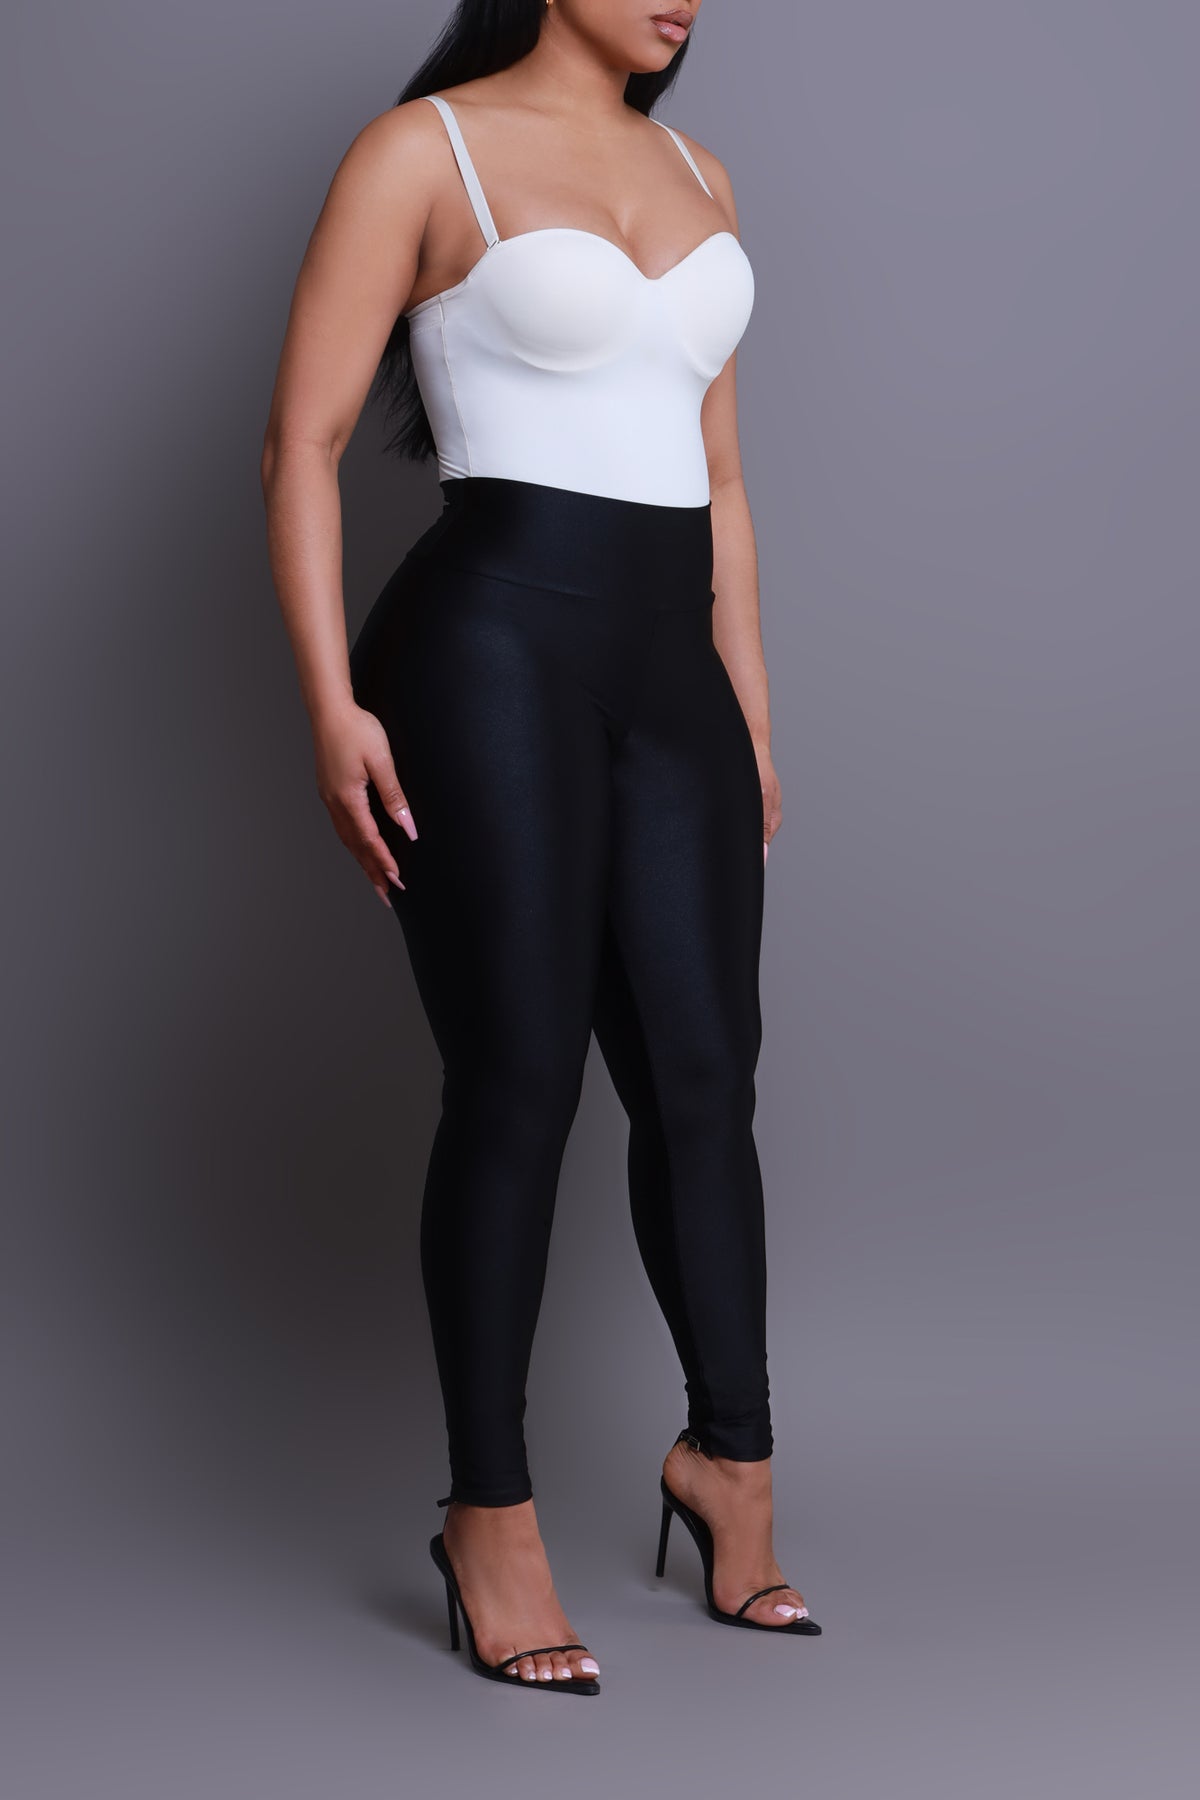 Snatch me up-shiny black leggings - Luxe Clothing Boutique & Accessories